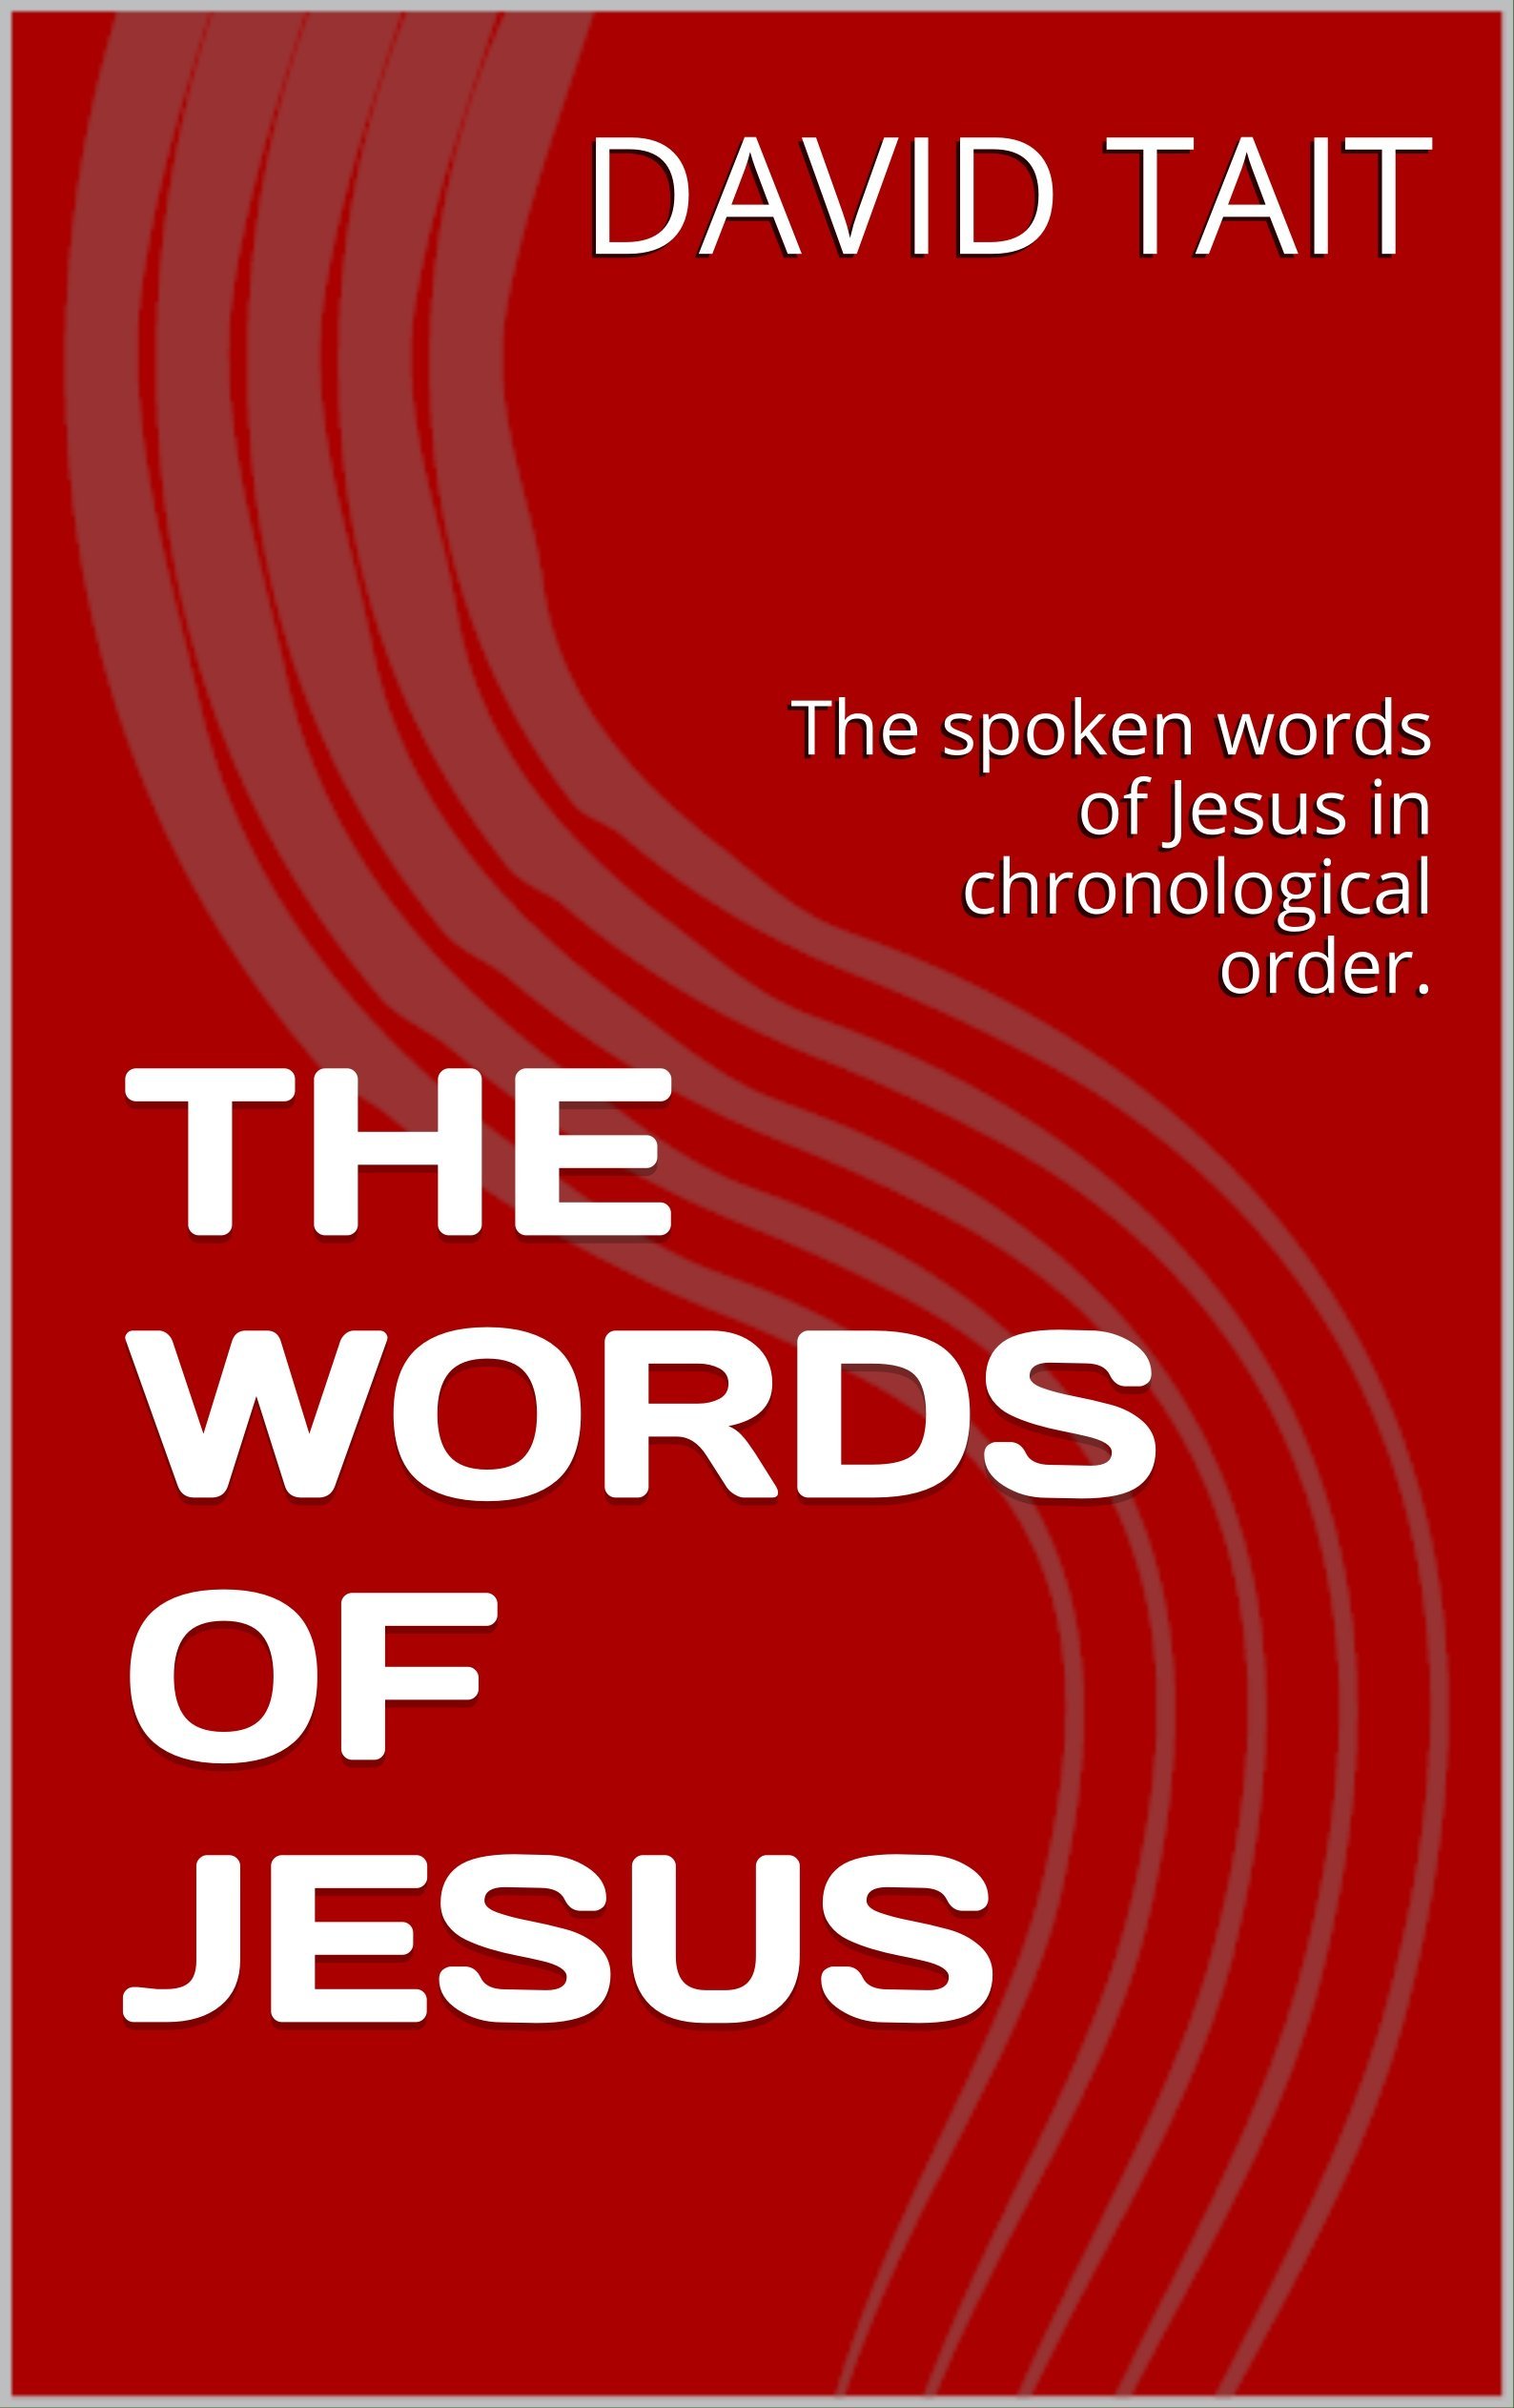 THE WORDS OF JESUS: The spoken words of Jesus in chronological order.